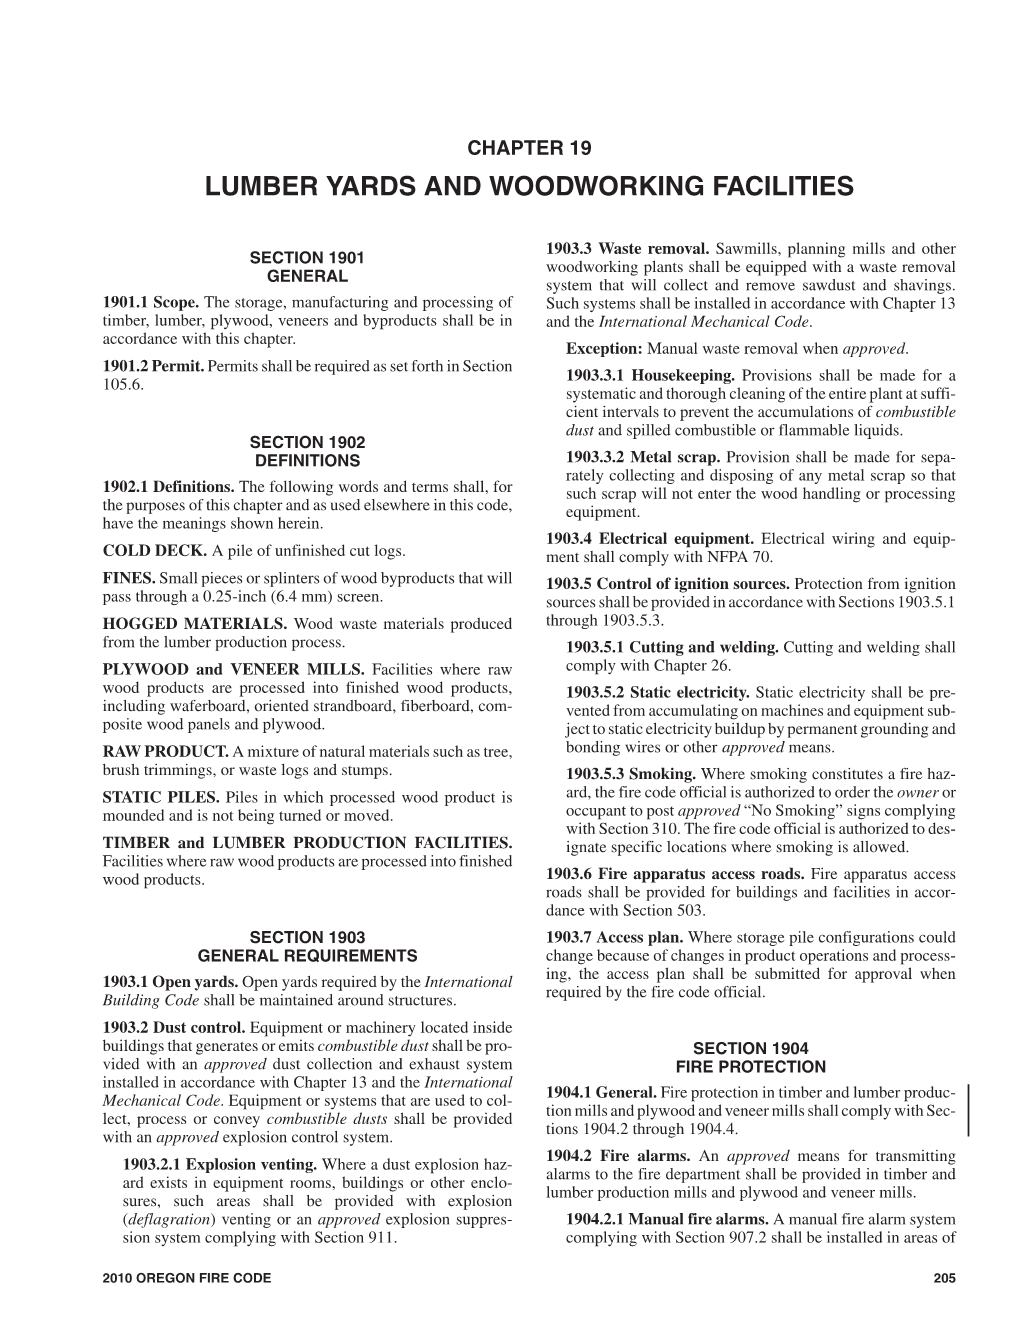 Chapter 19 Lumber Yards and Woodworking Facilities